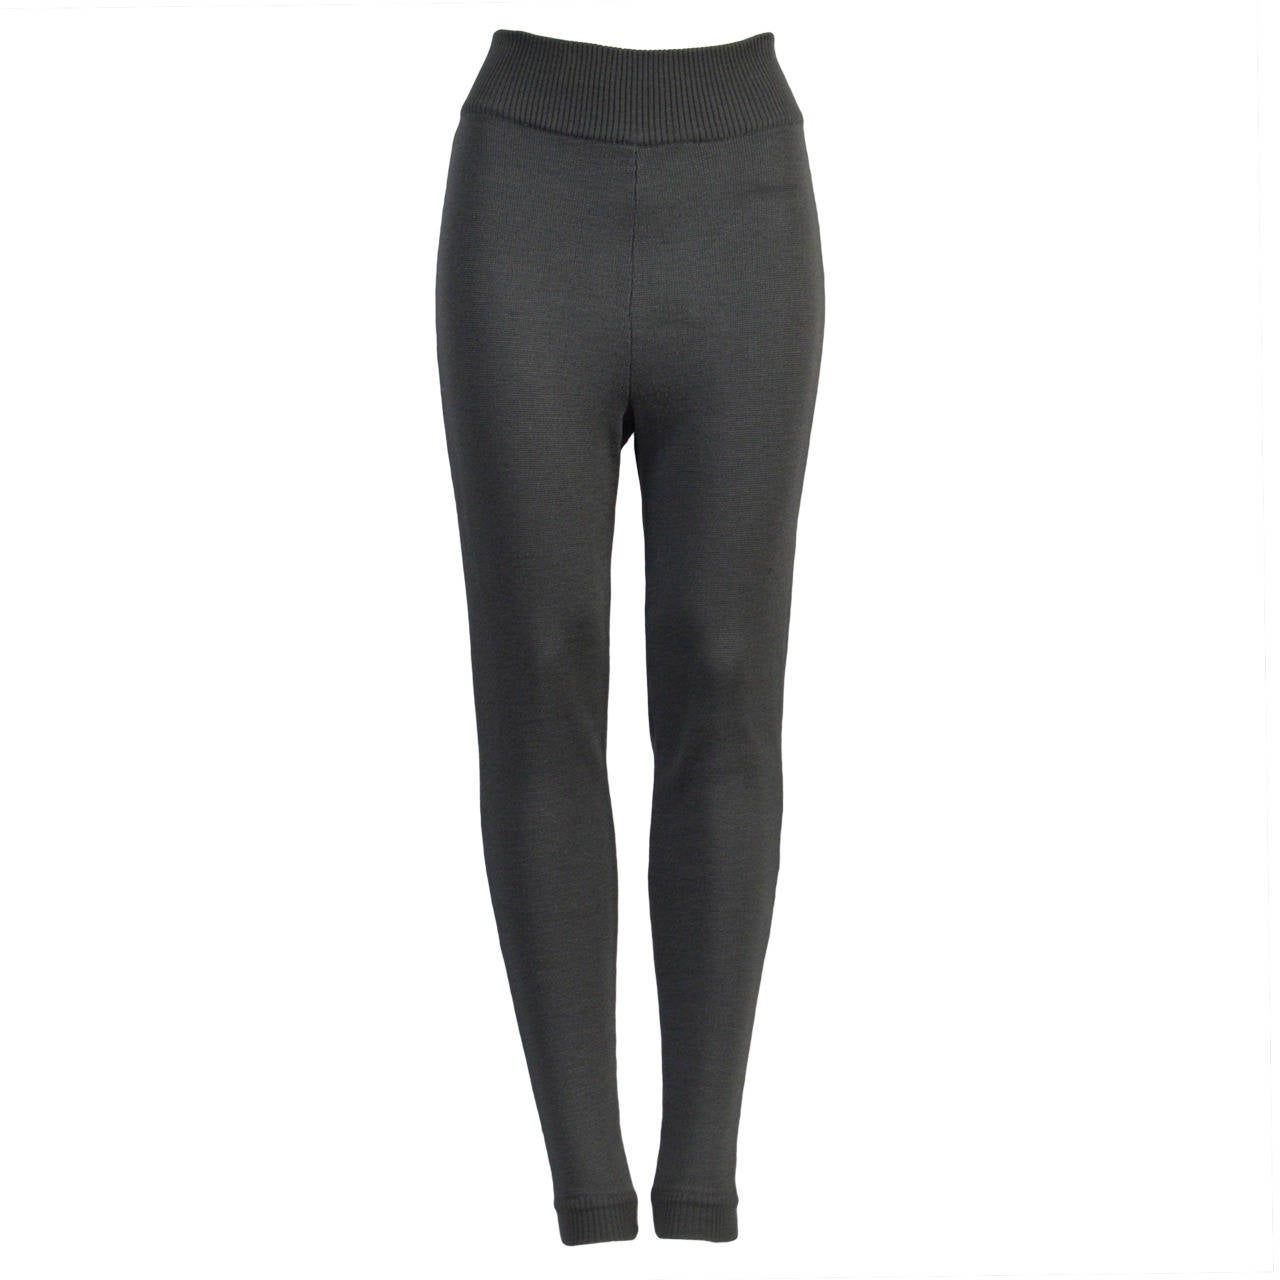 Claude Montana High Waisted Knit Wool Legging Pants For Sale